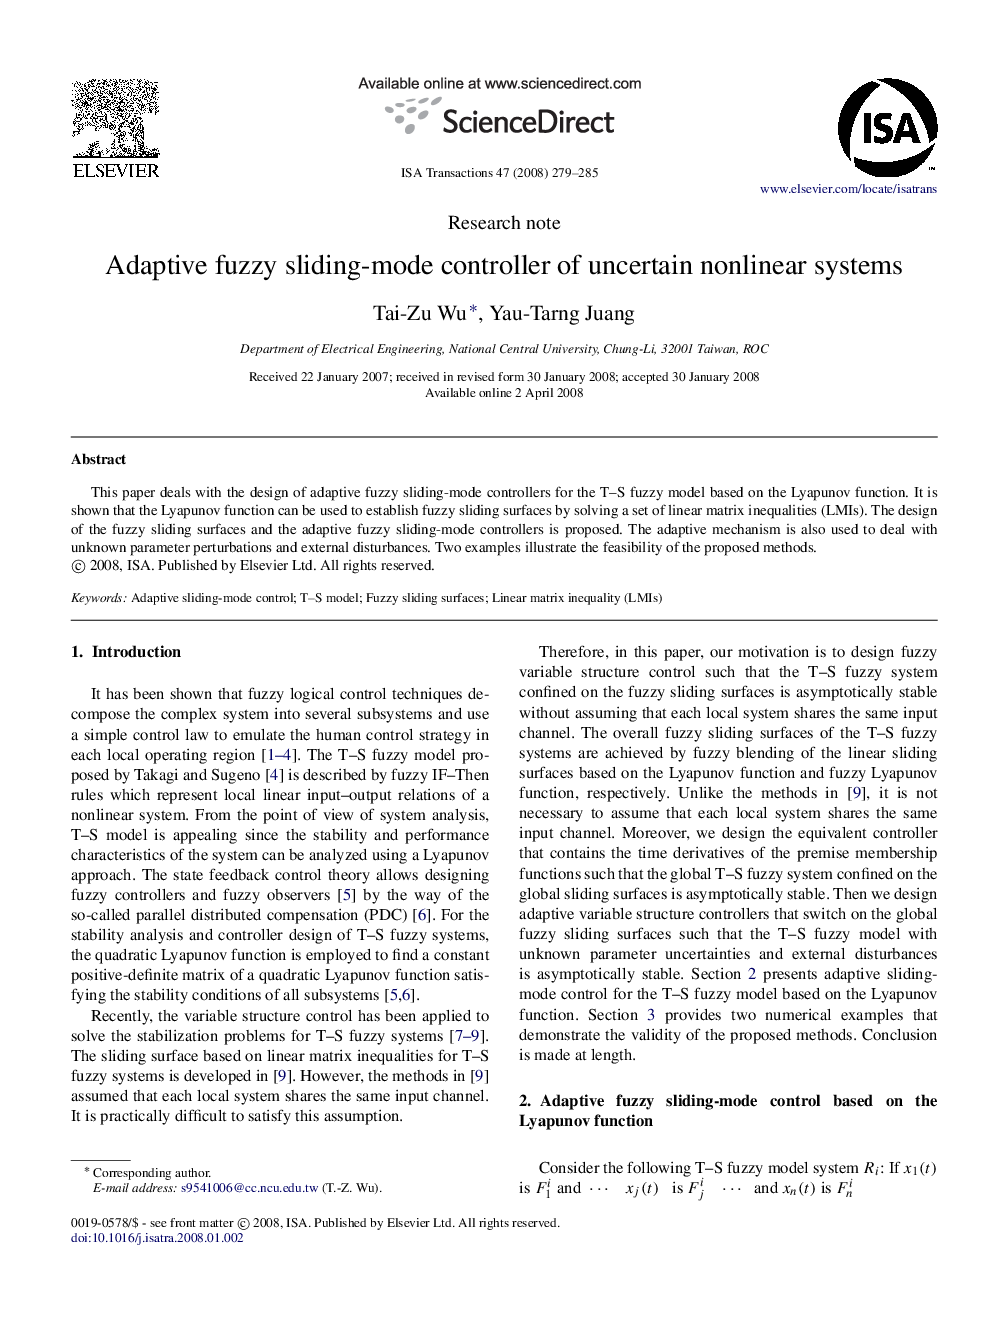 Research noteAdaptive fuzzy sliding-mode controller of uncertain nonlinear systems